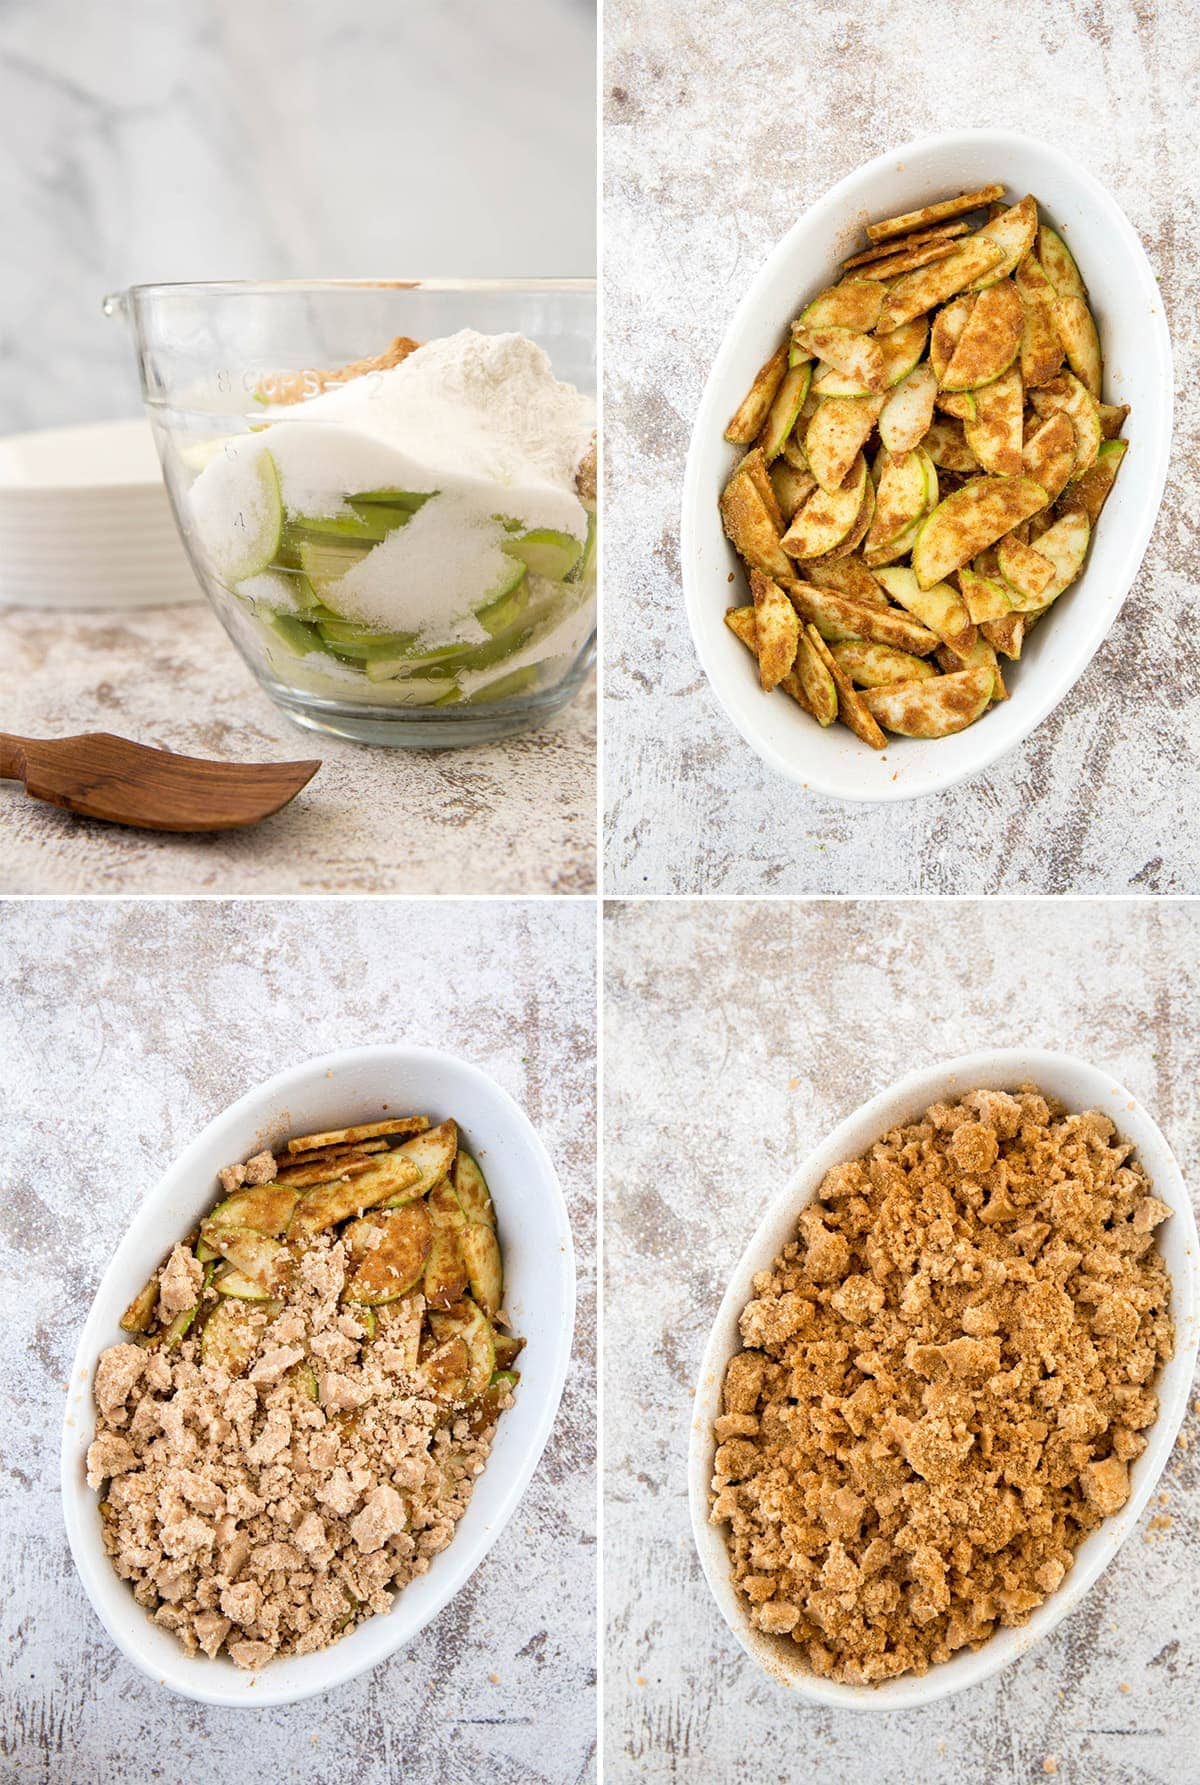 4 images showing how to make apple cobbler step by step